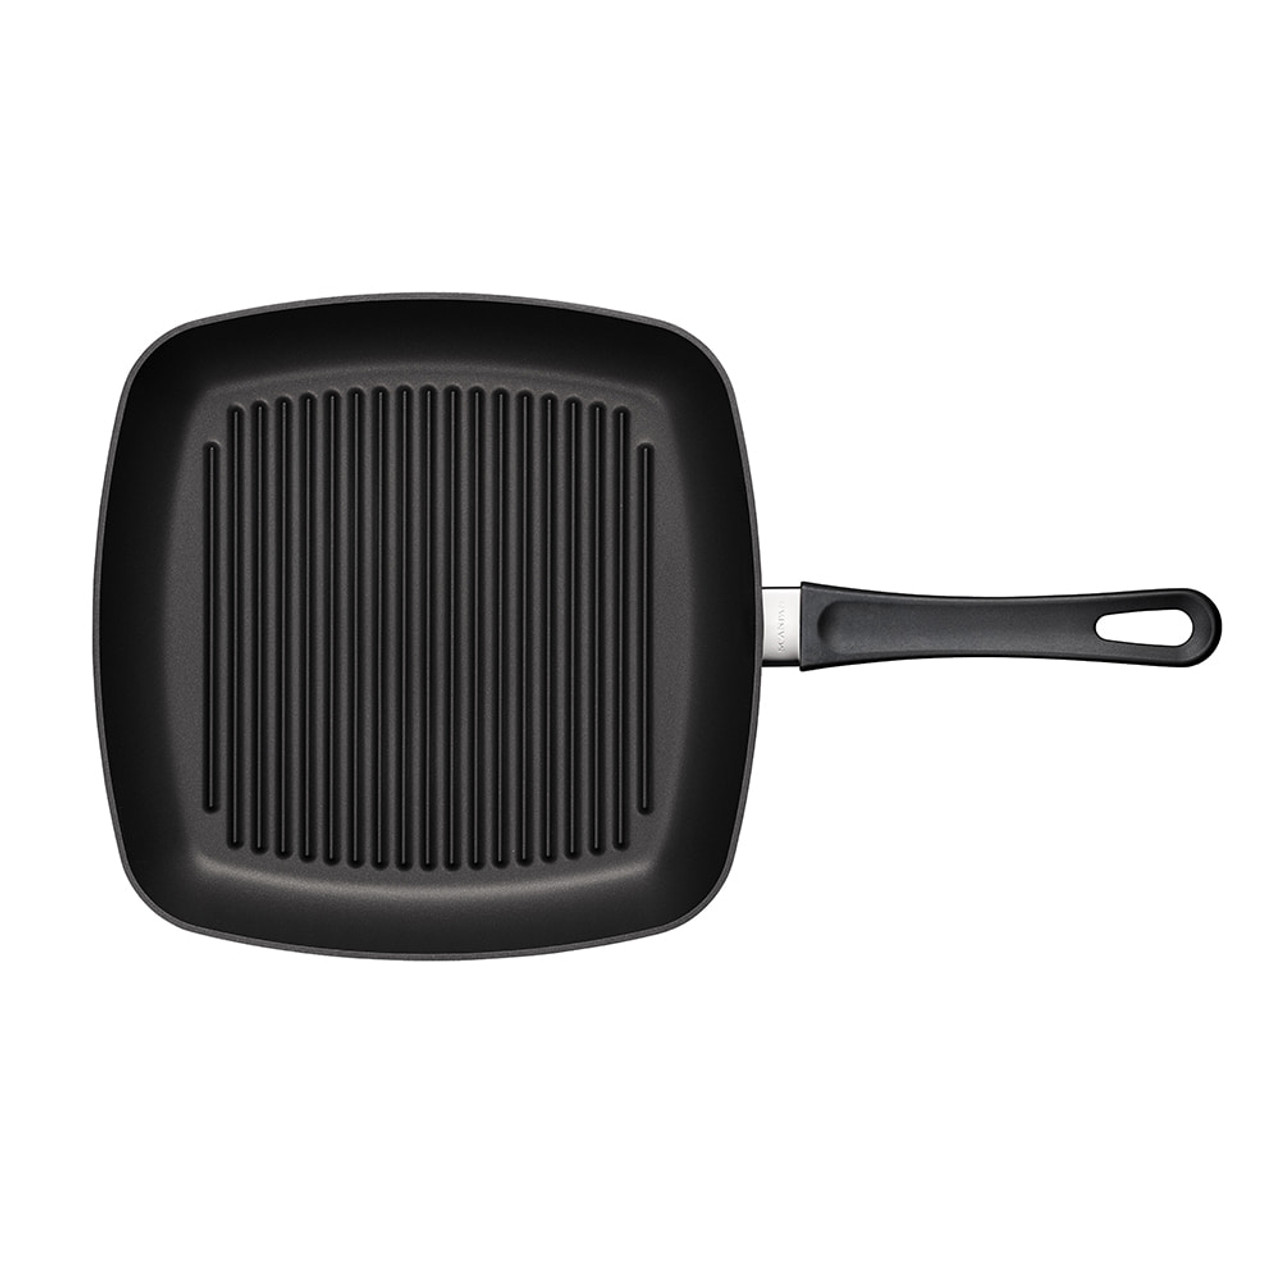 https://cdn11.bigcommerce.com/s-hccytny0od/images/stencil/1280x1280/products/3122/11060/scanpan-classic-induction-grill-pan-2__99883.1578040806.jpg?c=2?imbypass=on